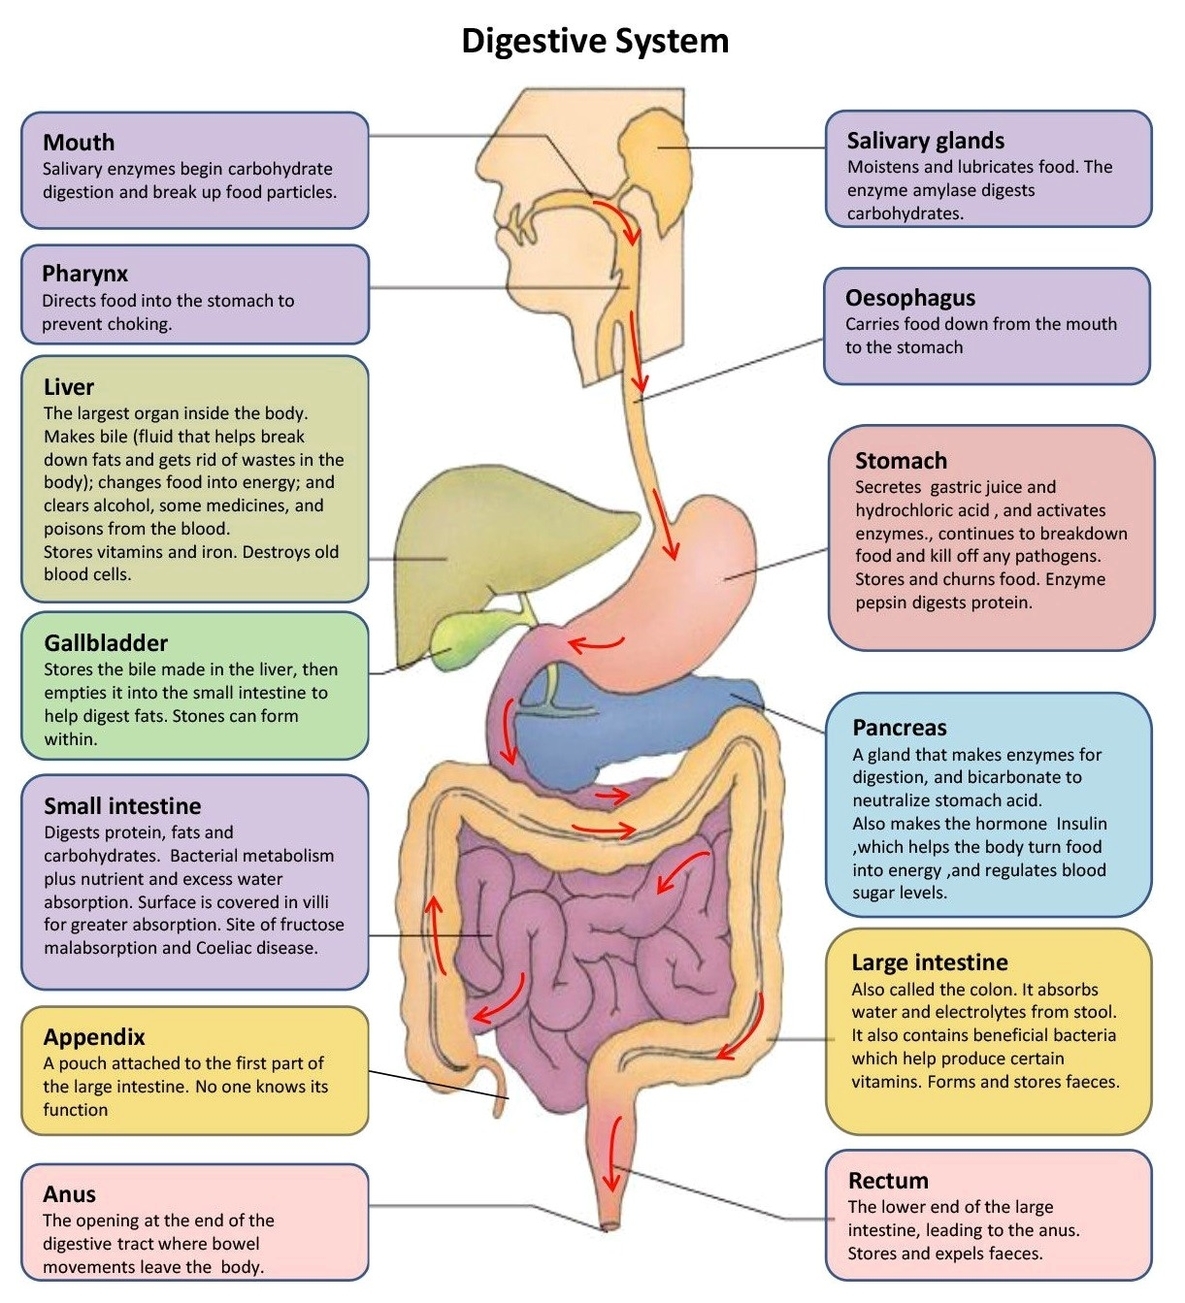 Digestive system parts explained